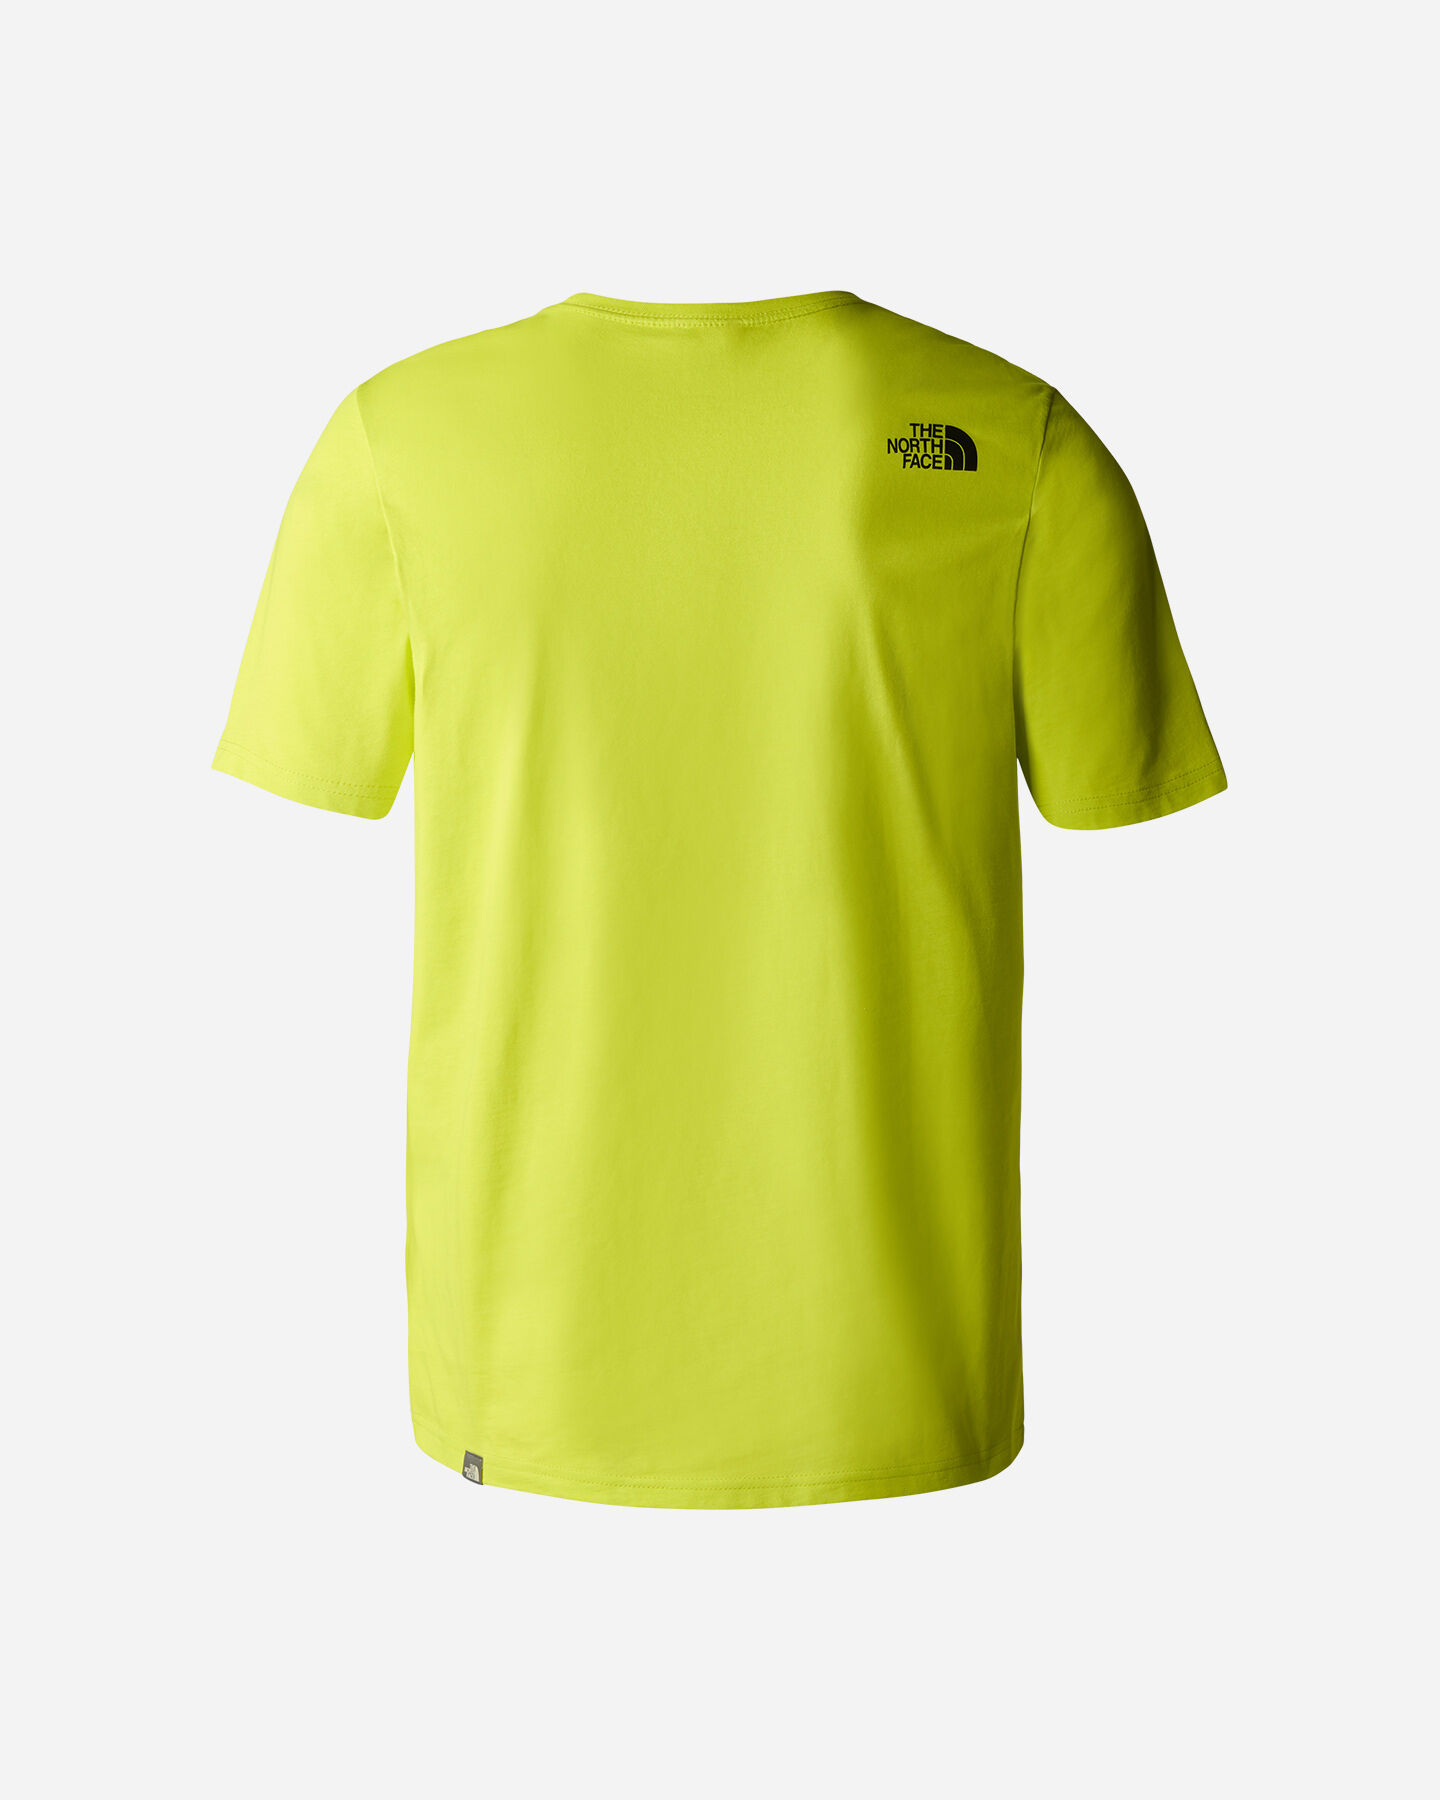  T-Shirt THE NORTH FACE EASY BIG LOGO M S5535605 scatto 1